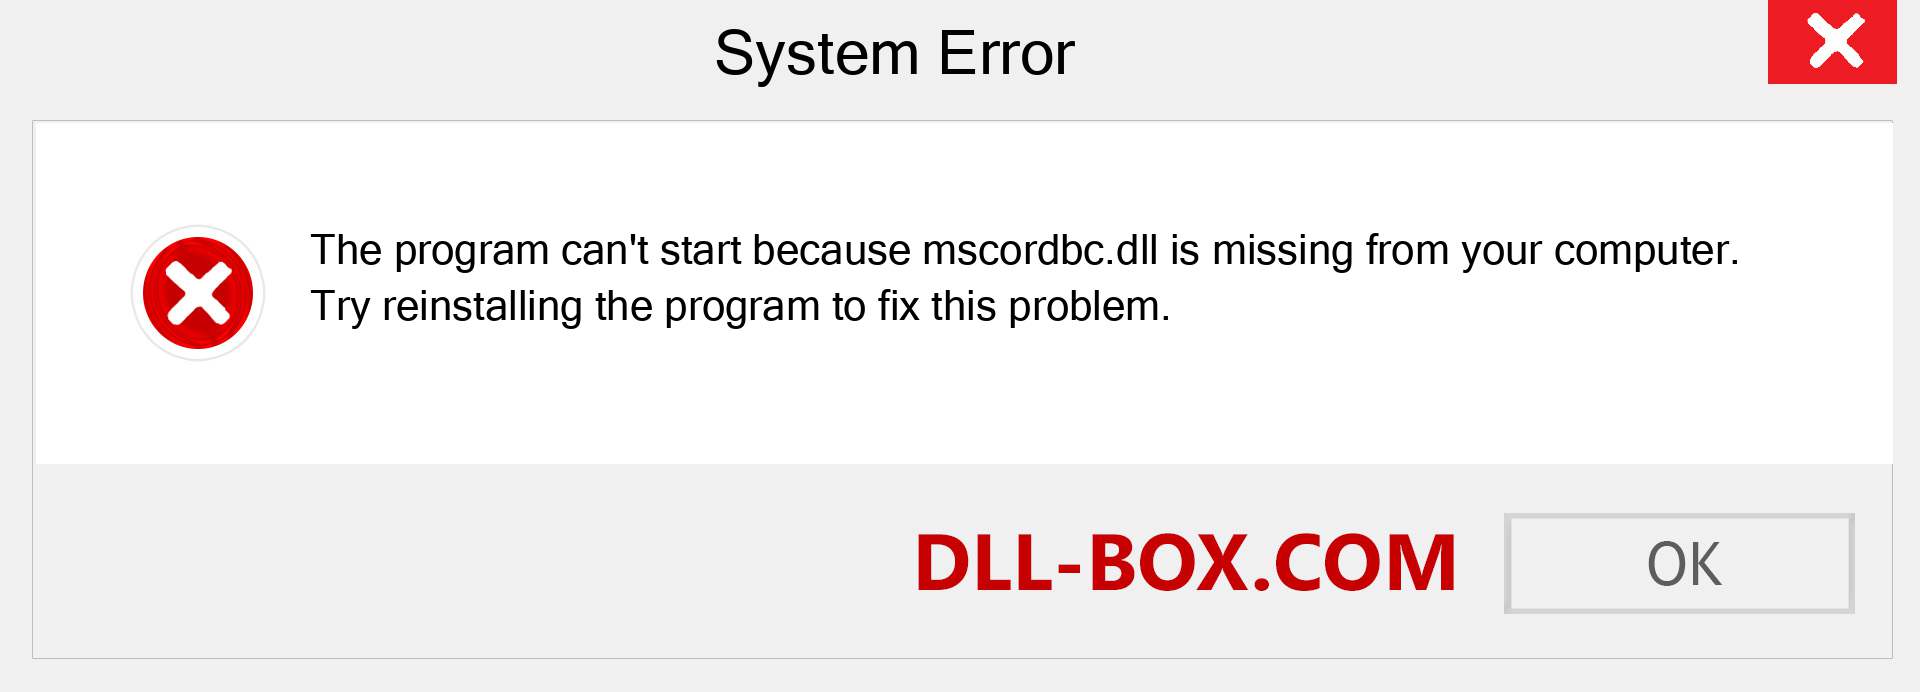  mscordbc.dll file is missing?. Download for Windows 7, 8, 10 - Fix  mscordbc dll Missing Error on Windows, photos, images